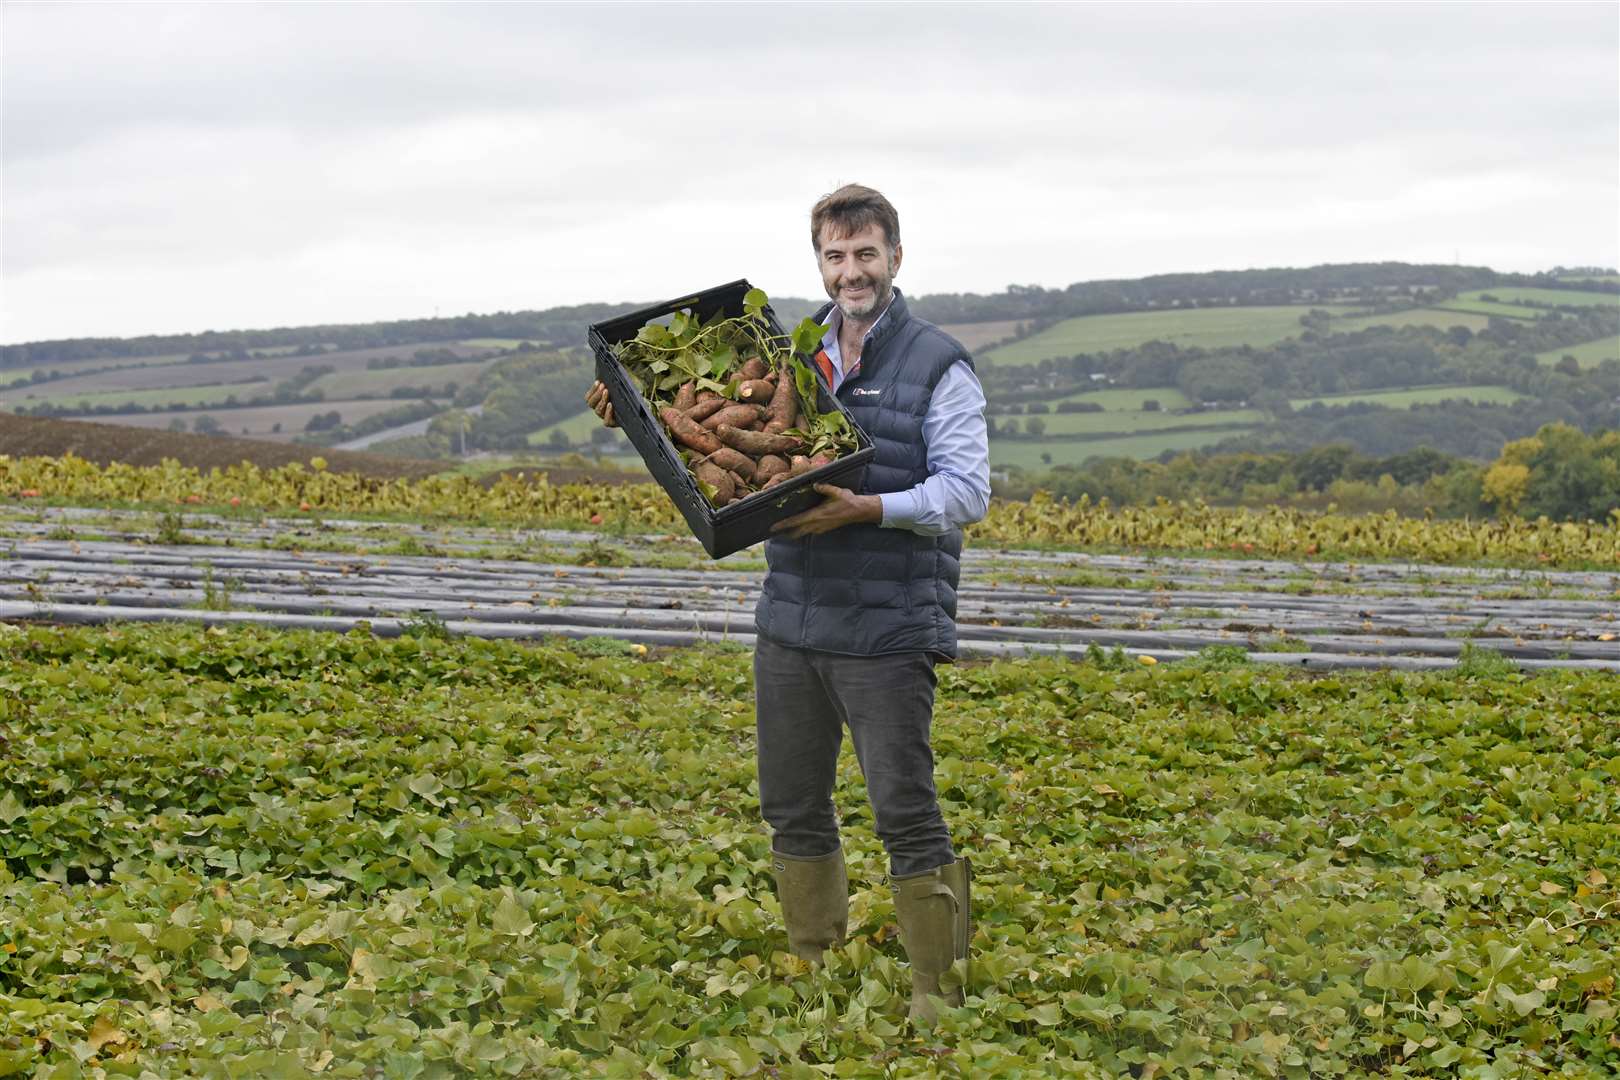 Joe Cottingham from Watts Farm with the UK's first ever homegrown sweet potato crop.